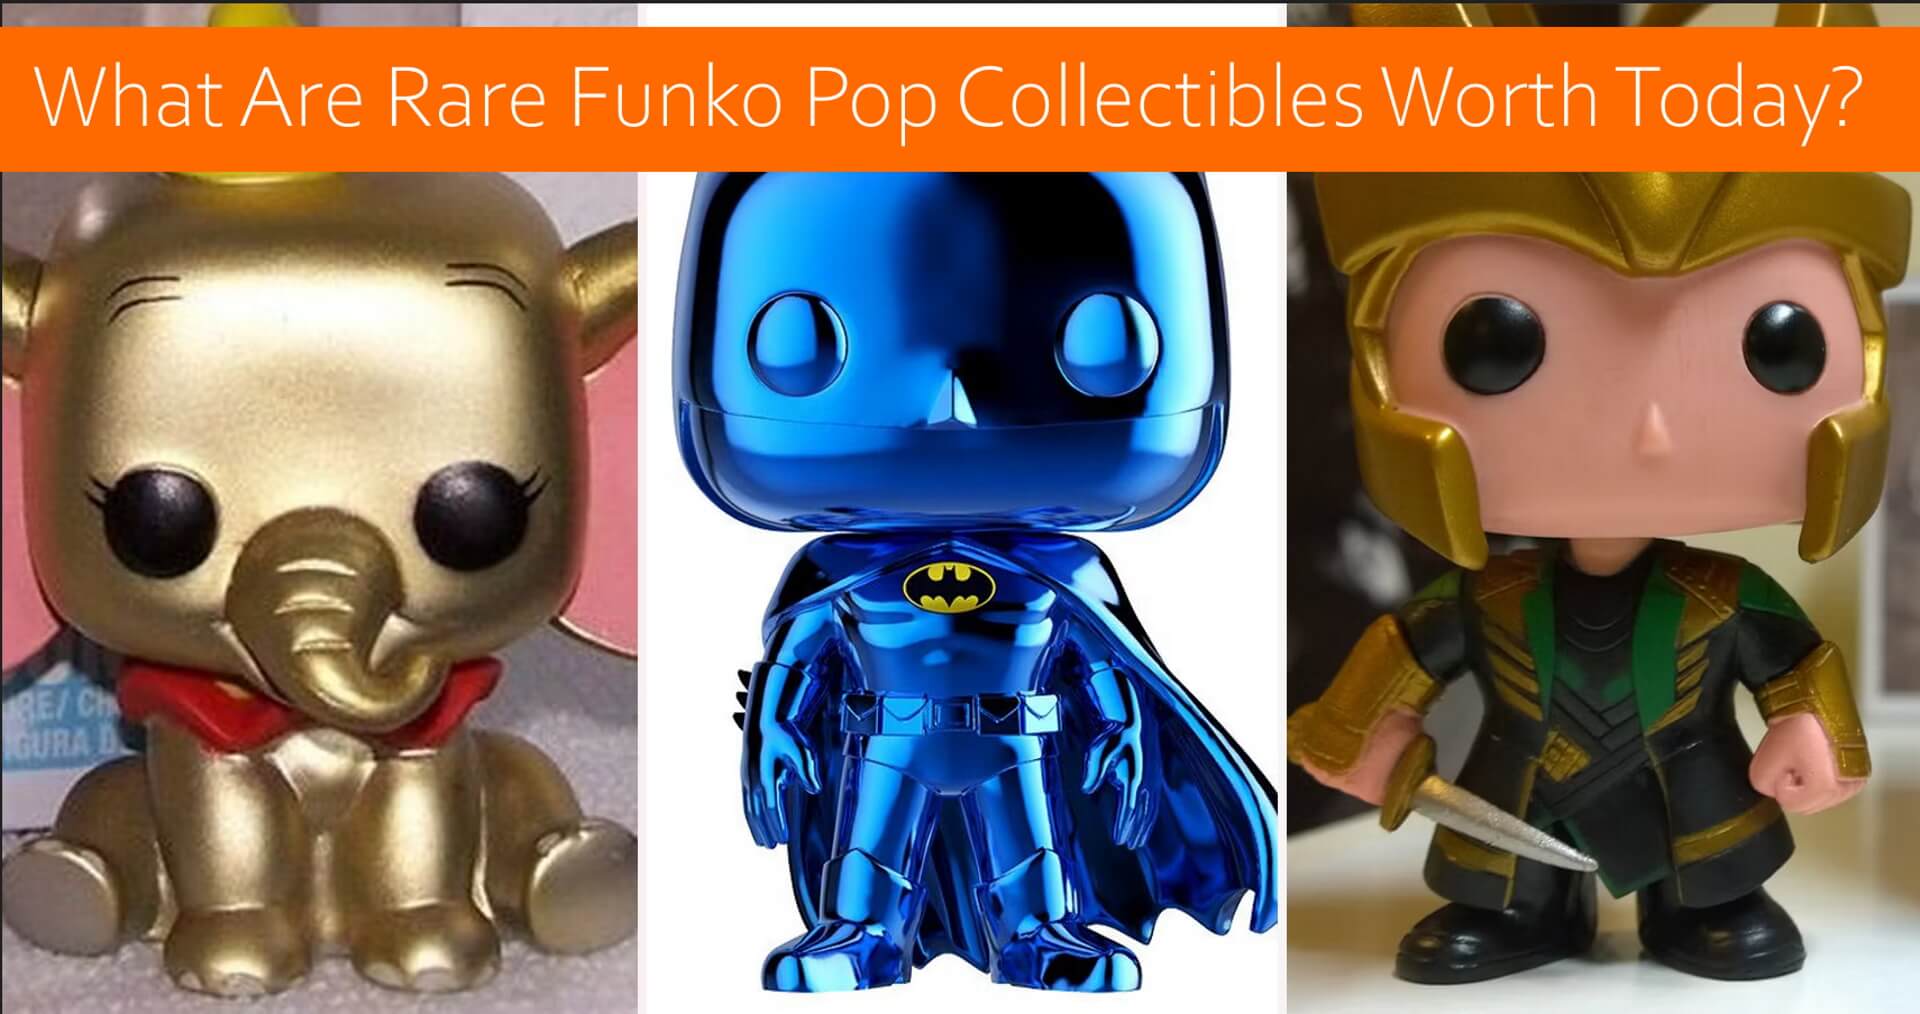 What Are Rare Funko Pop Collectibles Worth Today